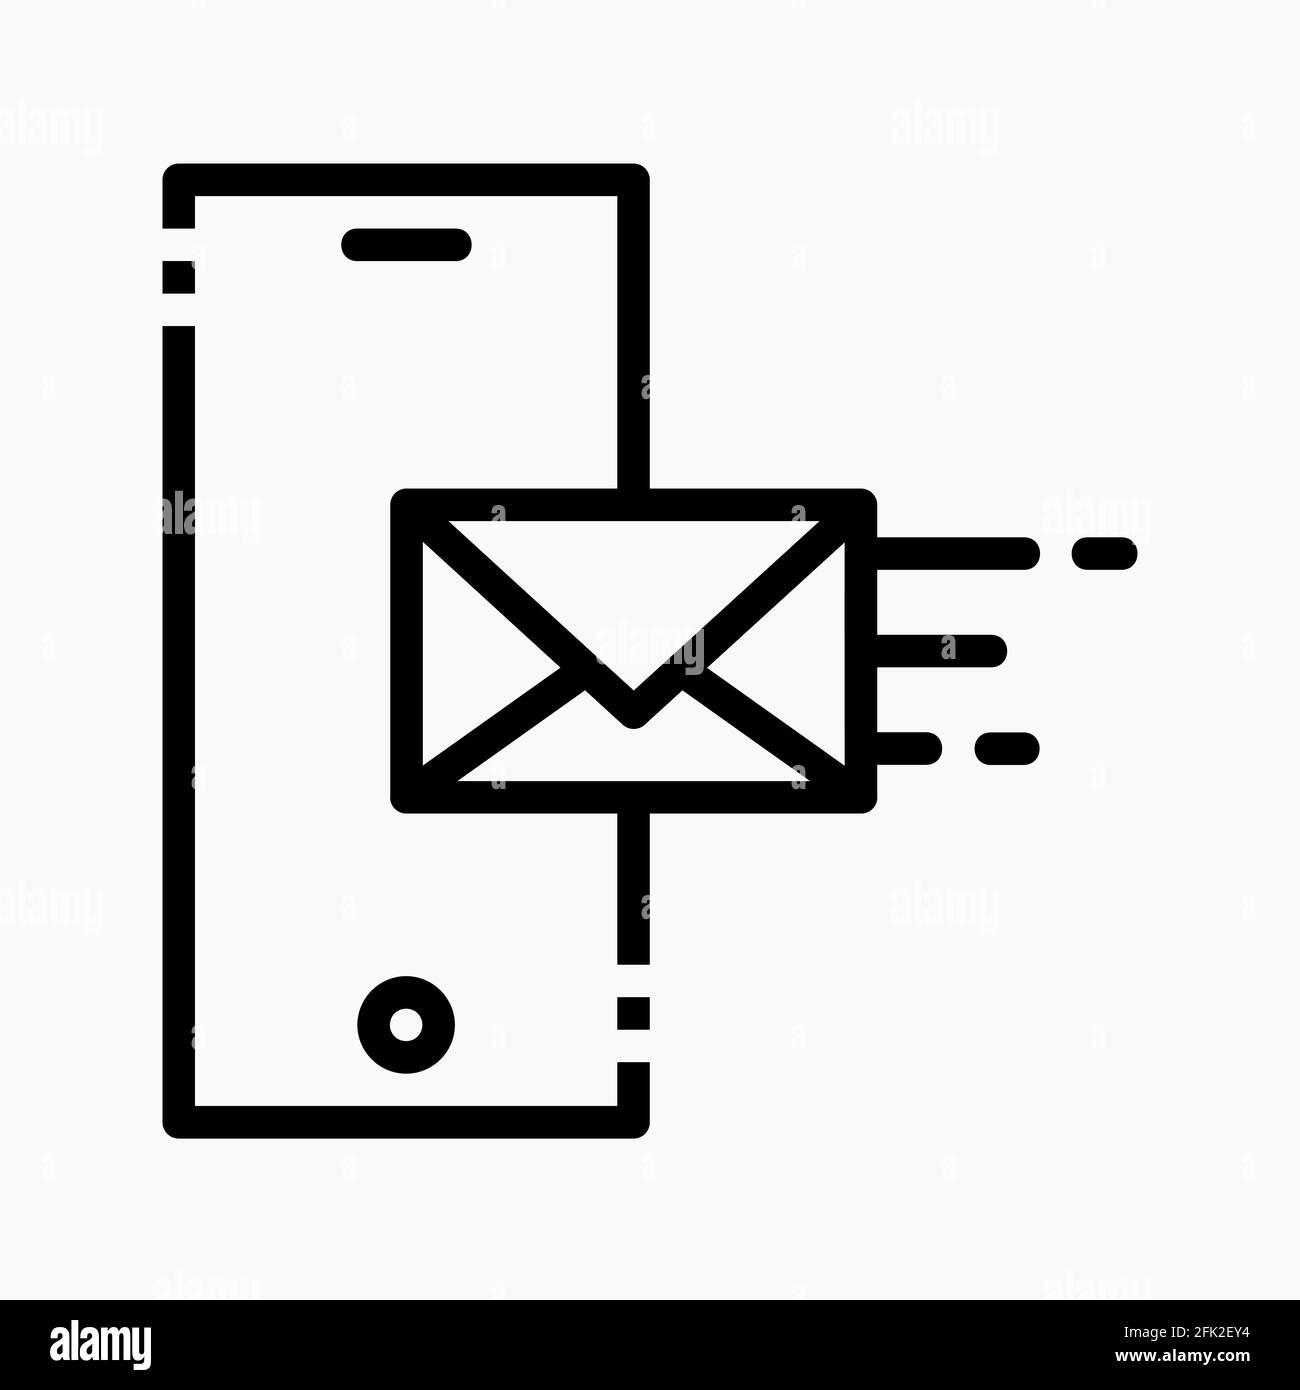 new message icon for mobile user interface symbol. Stock Vector